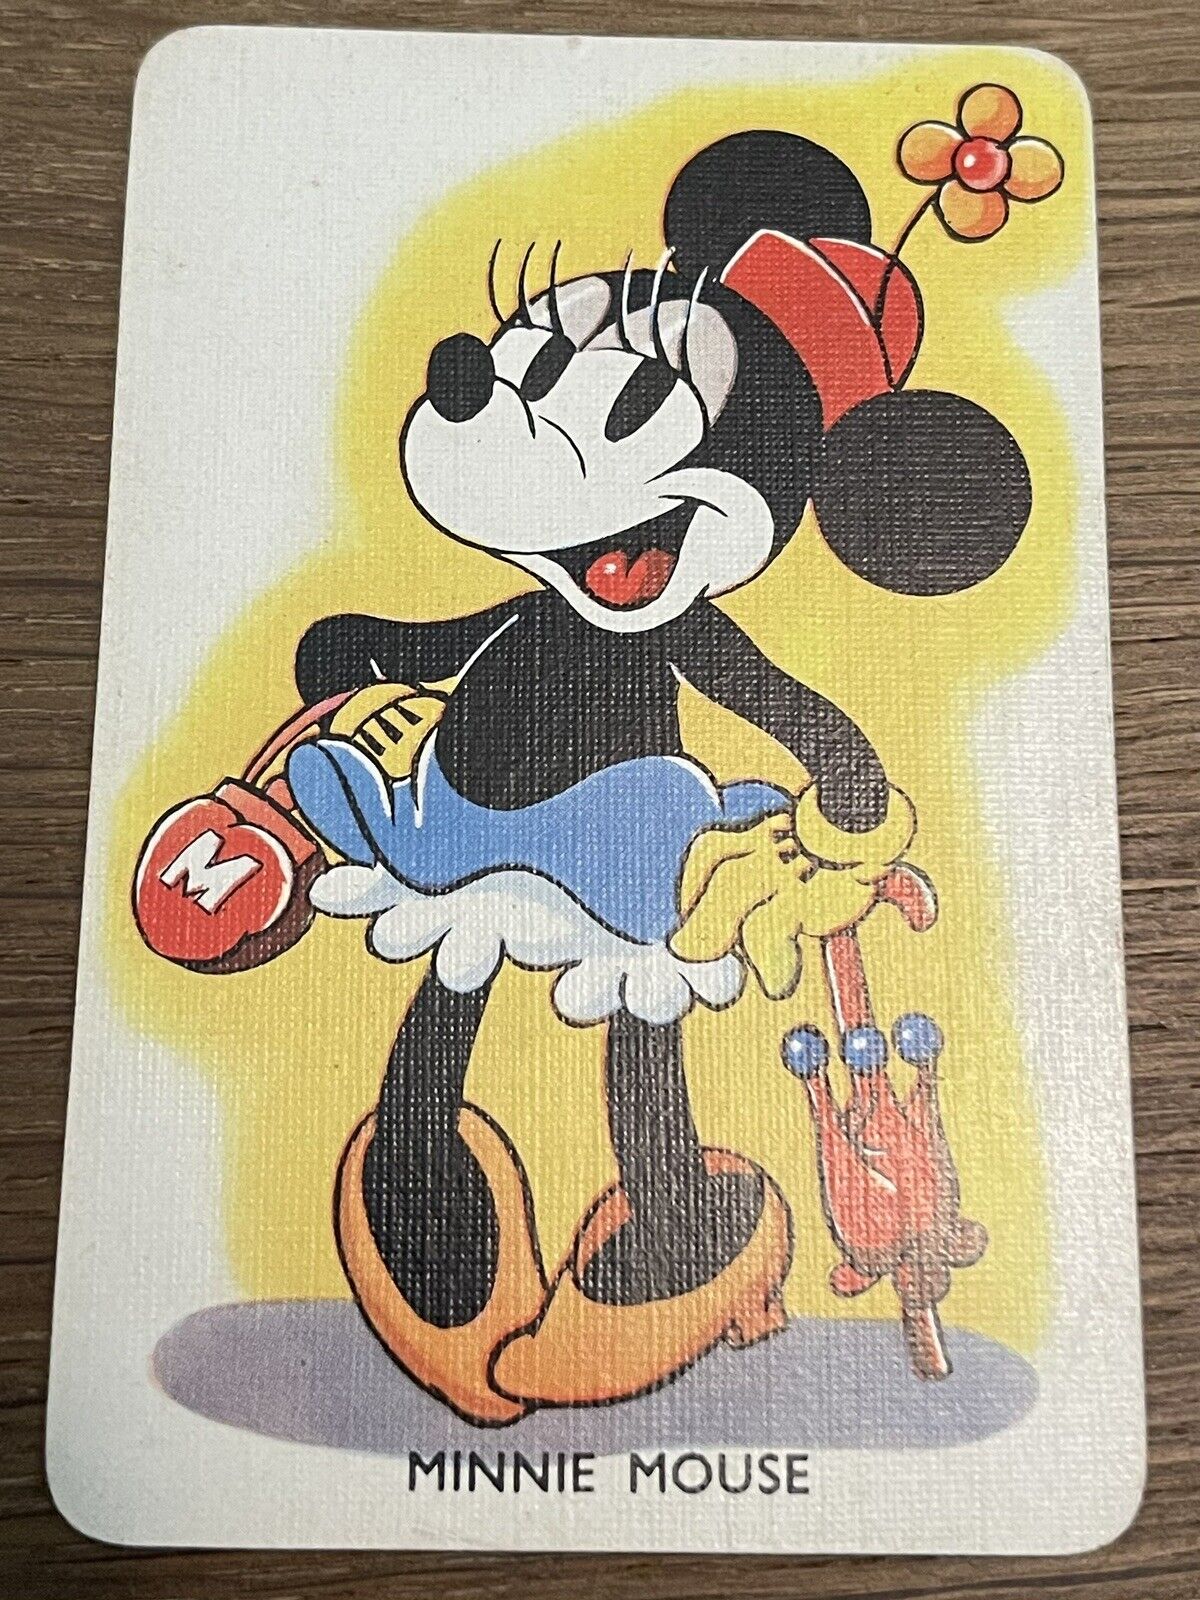 VINTAGE 1938 CASTELL MINNIE MOUSE SHUFFLED SYMPHONIES CARD NM-MINT+ AMAZING